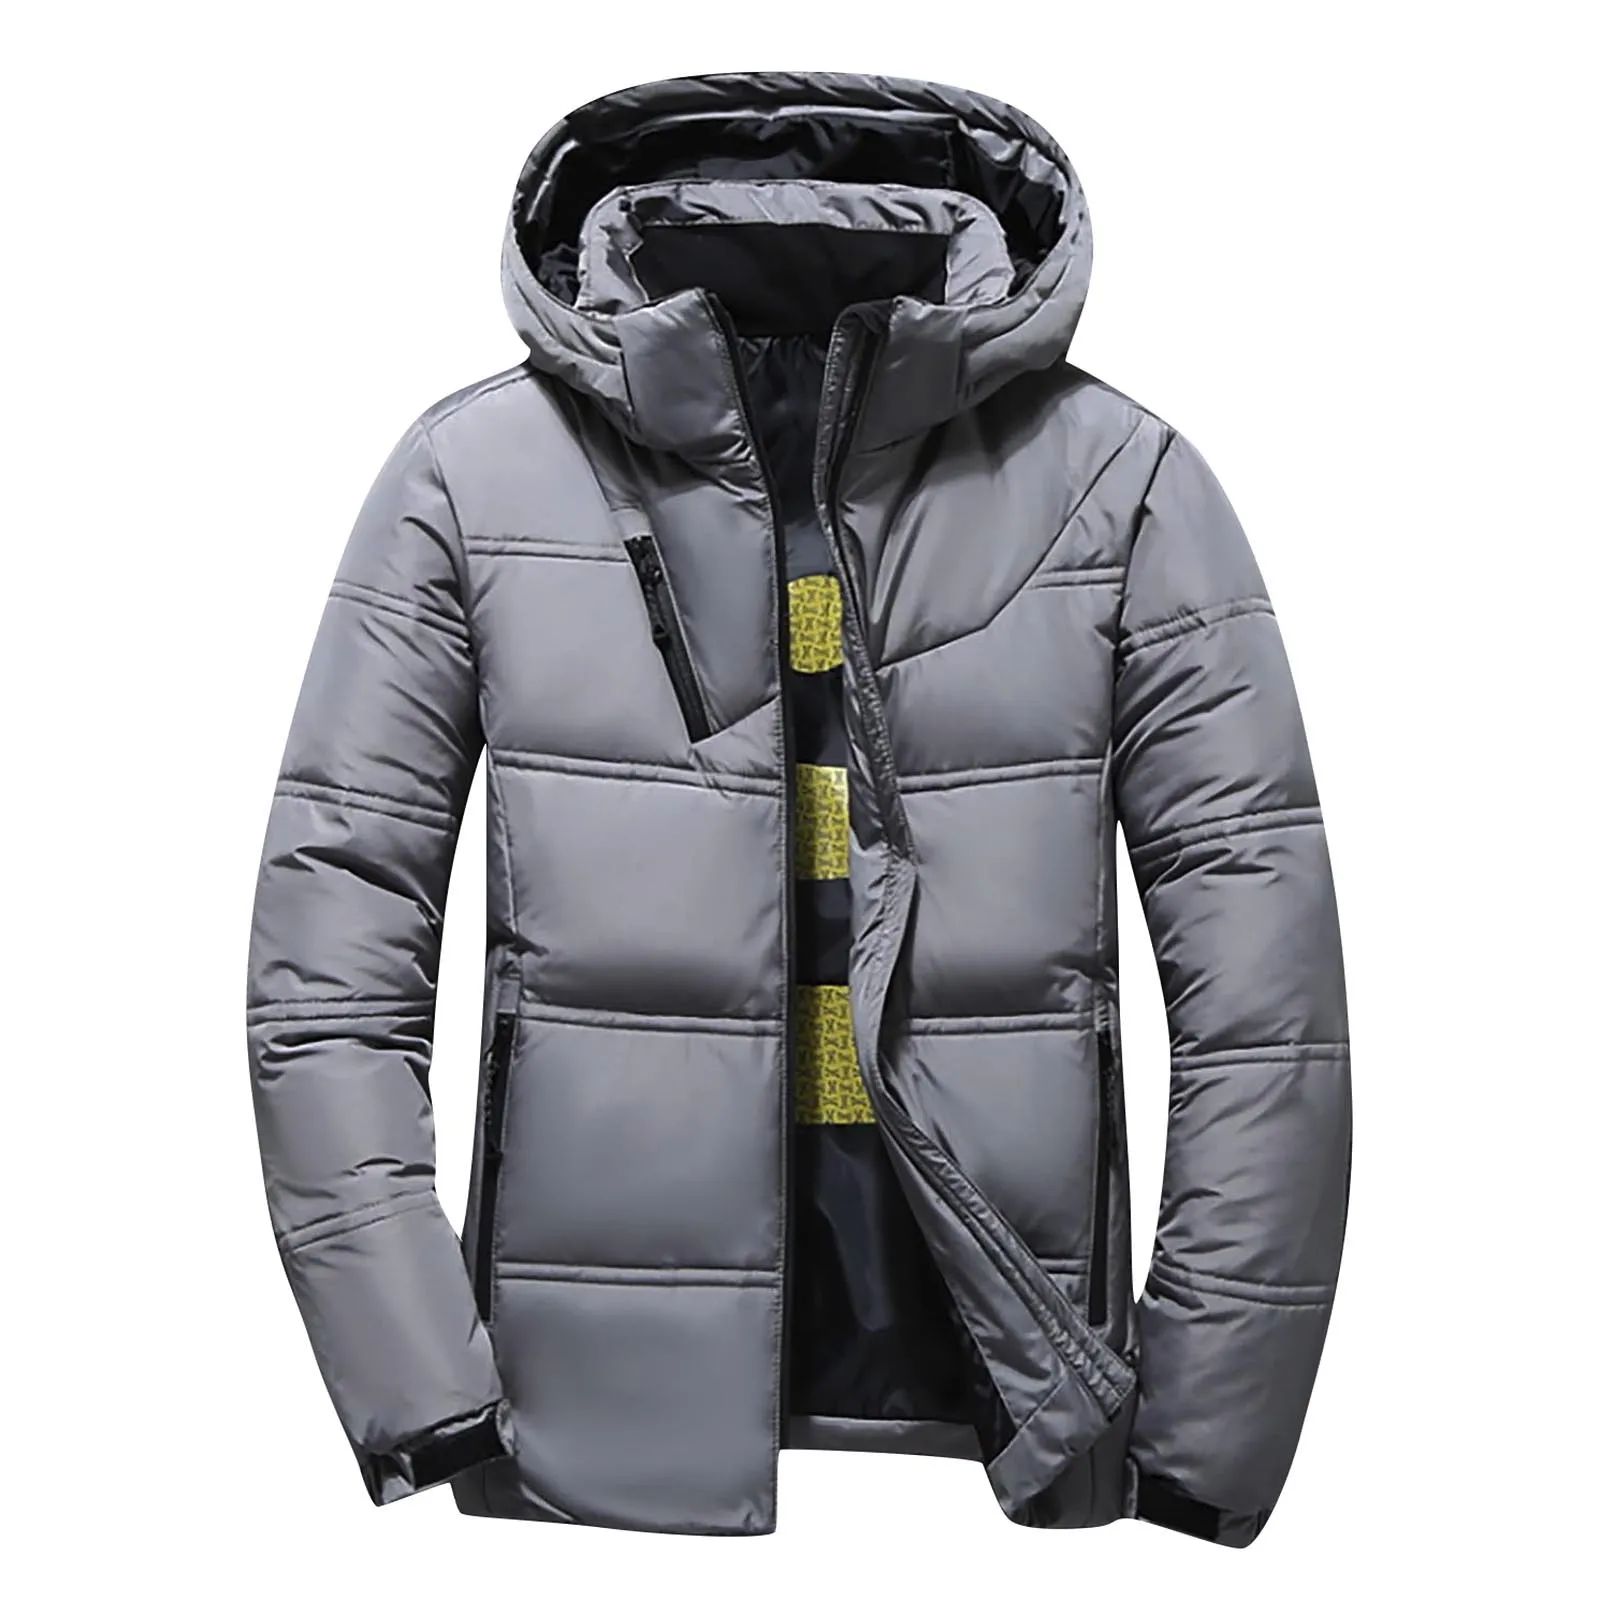 stone island jacket Fashion Men's Autumn And Winter Loose Solid Colors Long Sleeve Cotton Padded Coat Casual Jacket Outerwear Chaquetas Hombre#g3 waterproof jacket